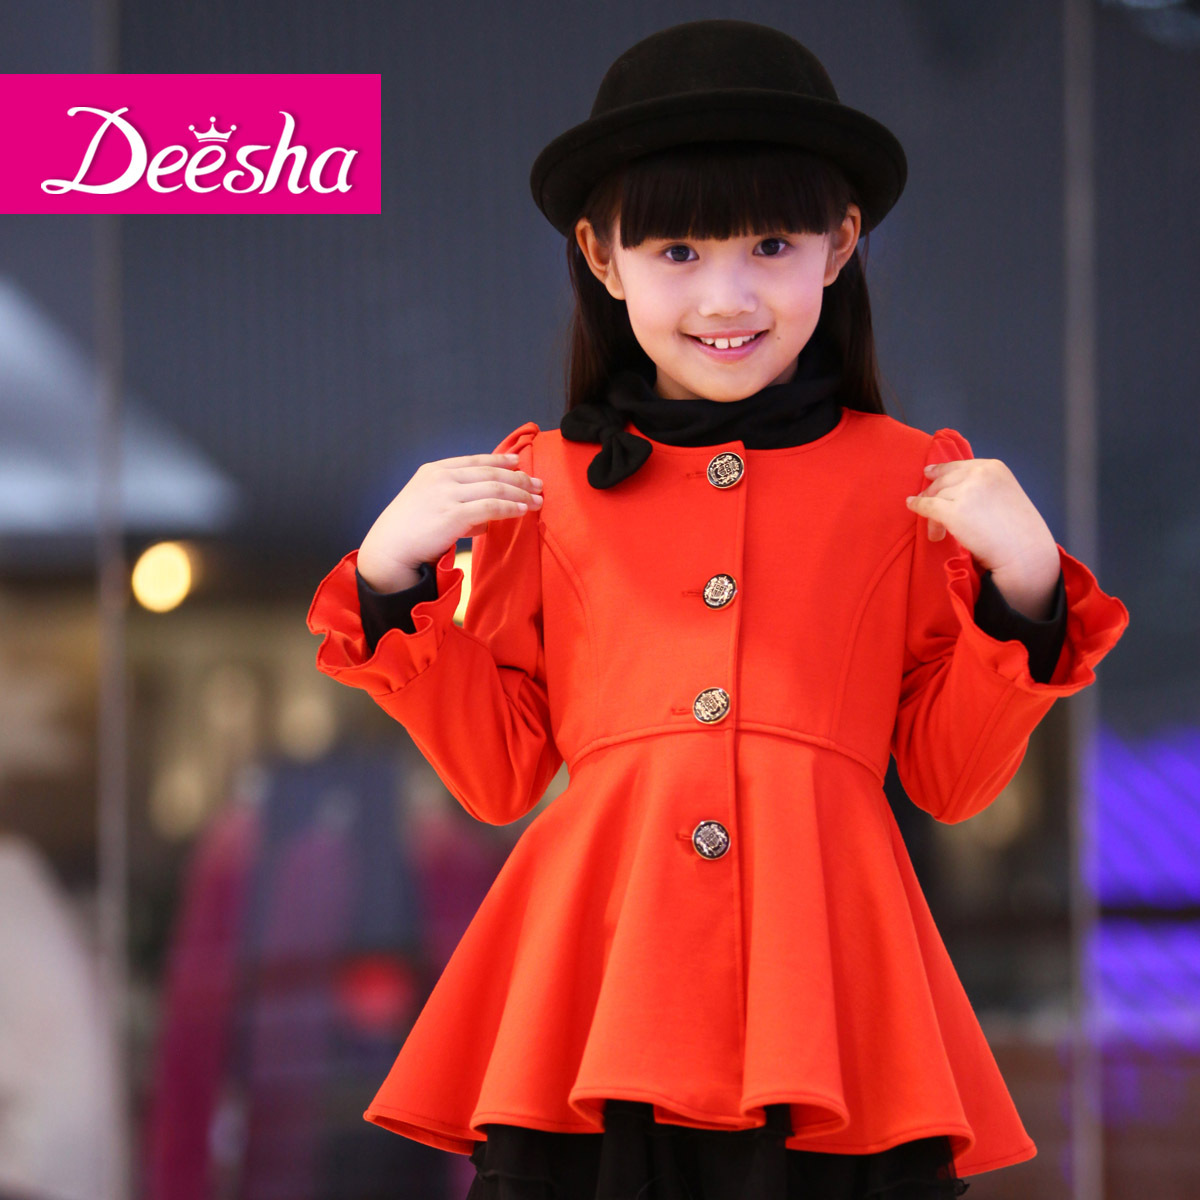 wholesale2013 DEESHA 2013 autumn female clothing outerwear o-neck casual top fashion trench 1217310